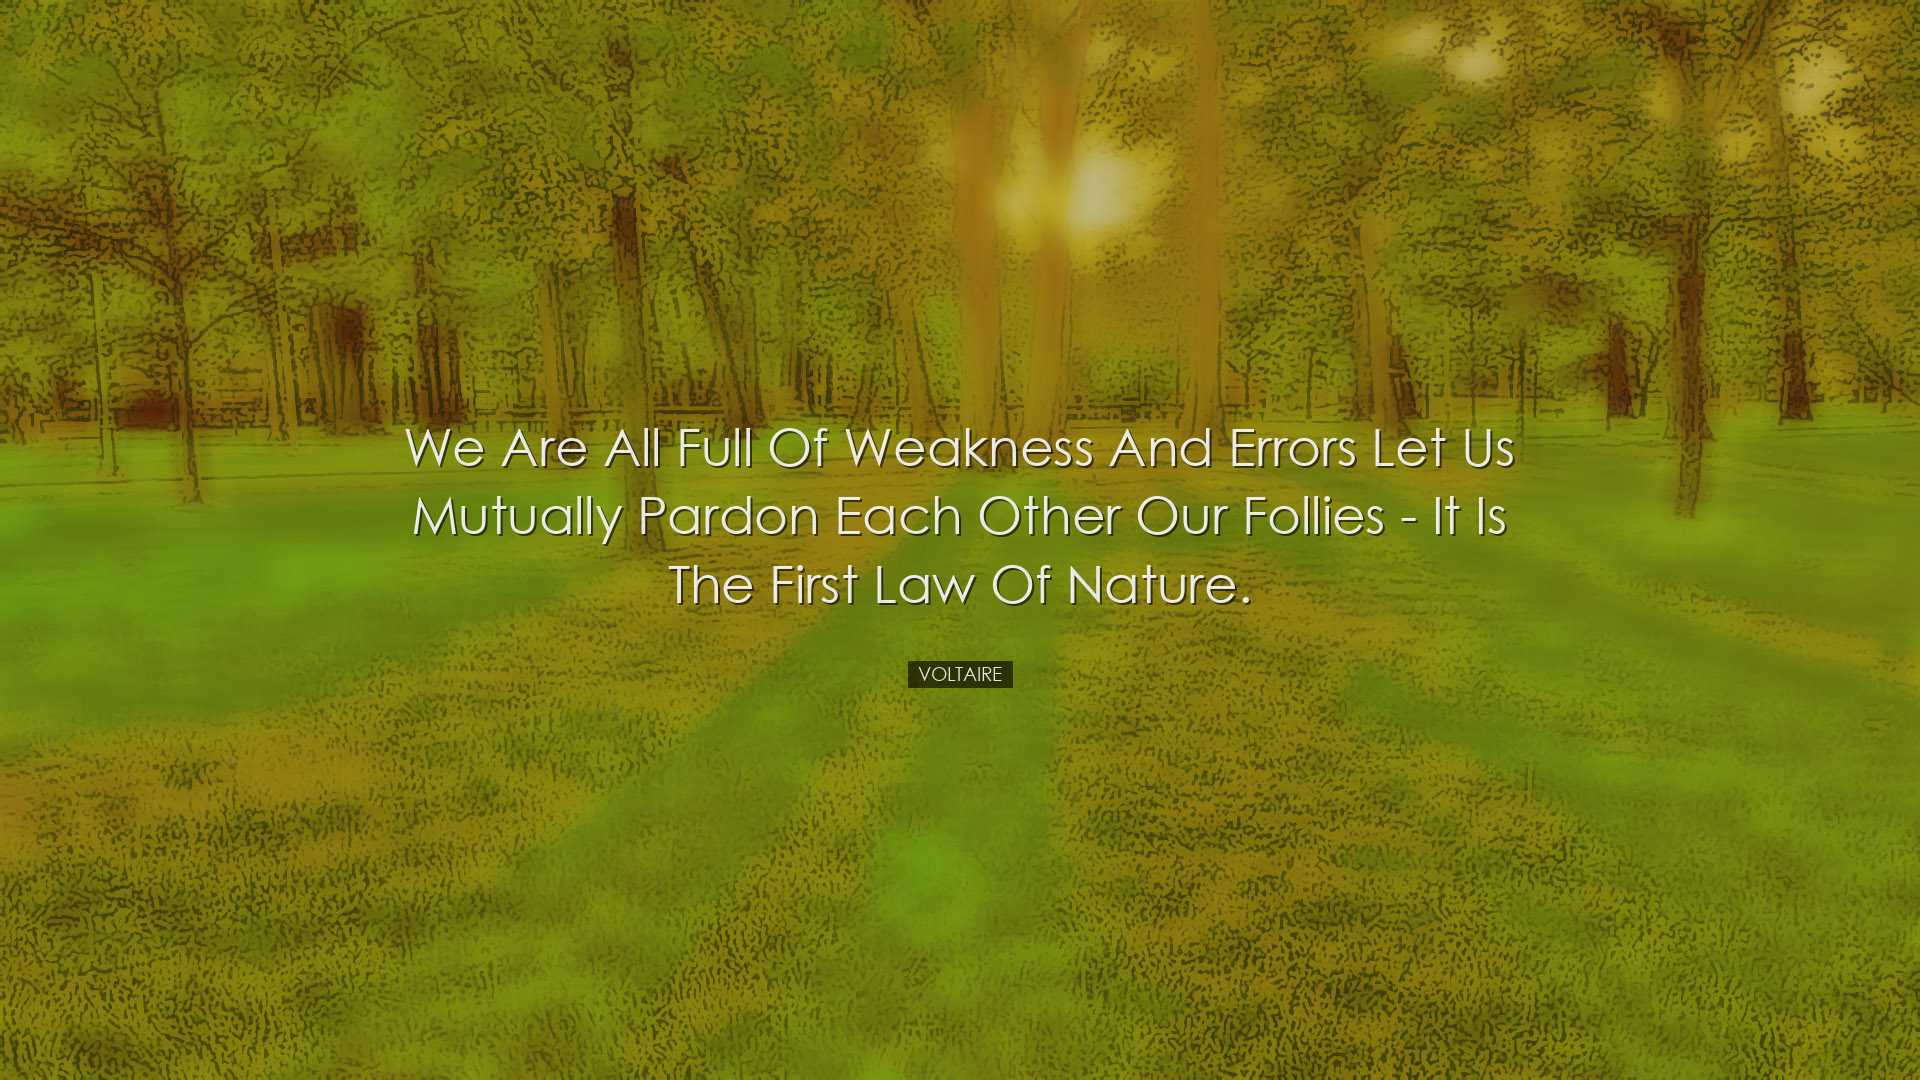 We are all full of weakness and errors let us mutually pardon each